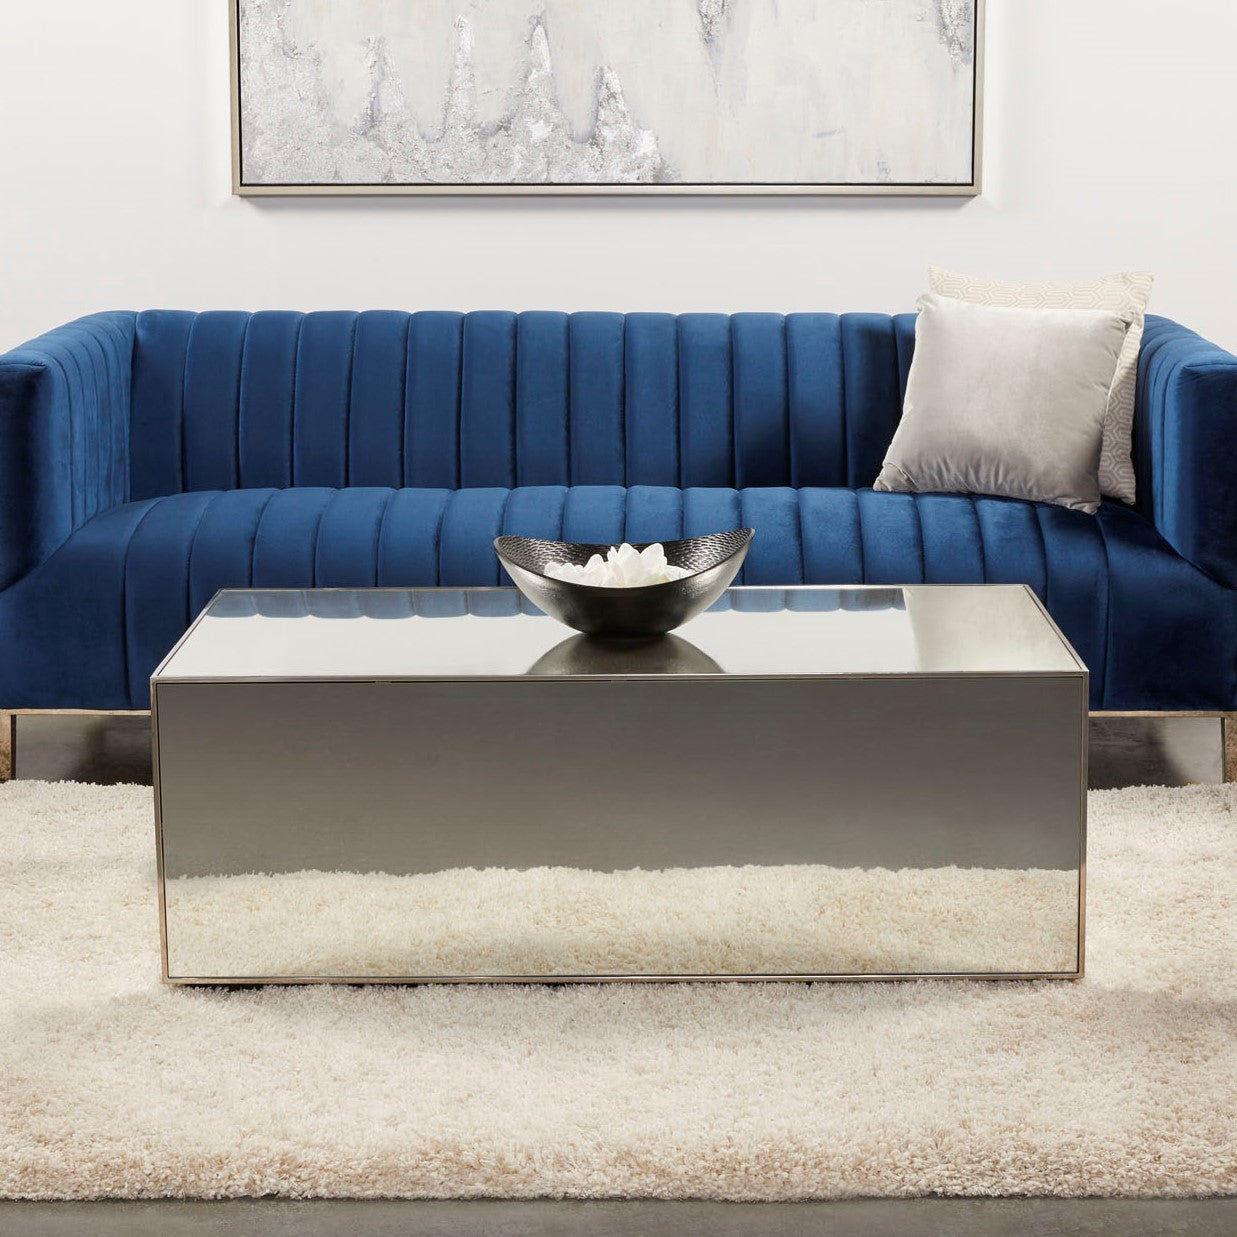 Infinity Mirror Coffee Table - Ella and Ross Furniture